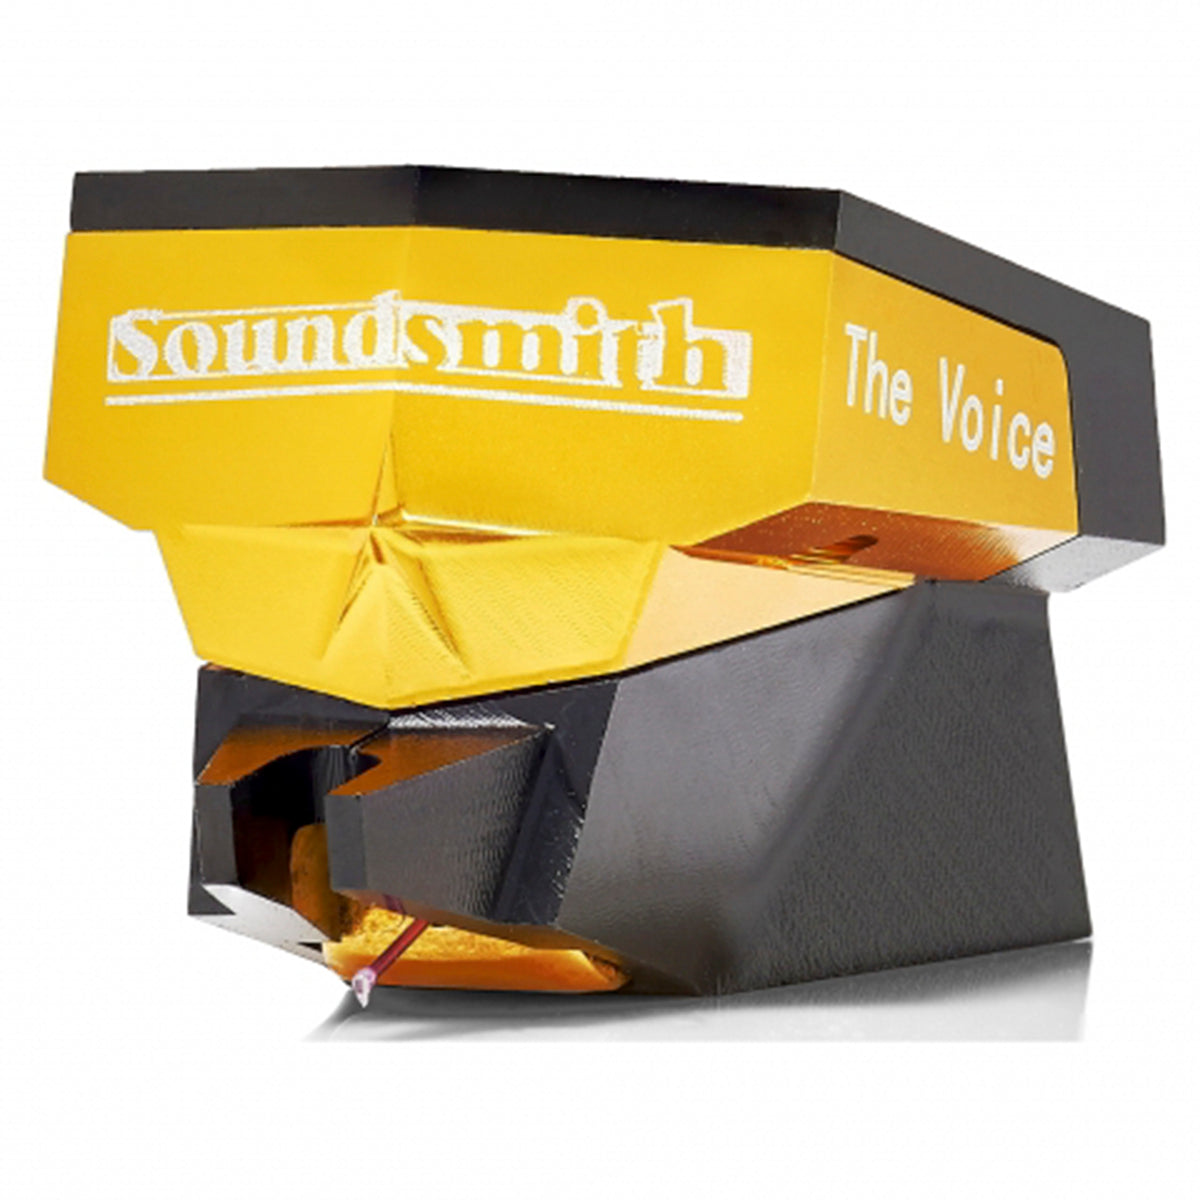 Soundsmith The Voice Moving Iron Cartridge